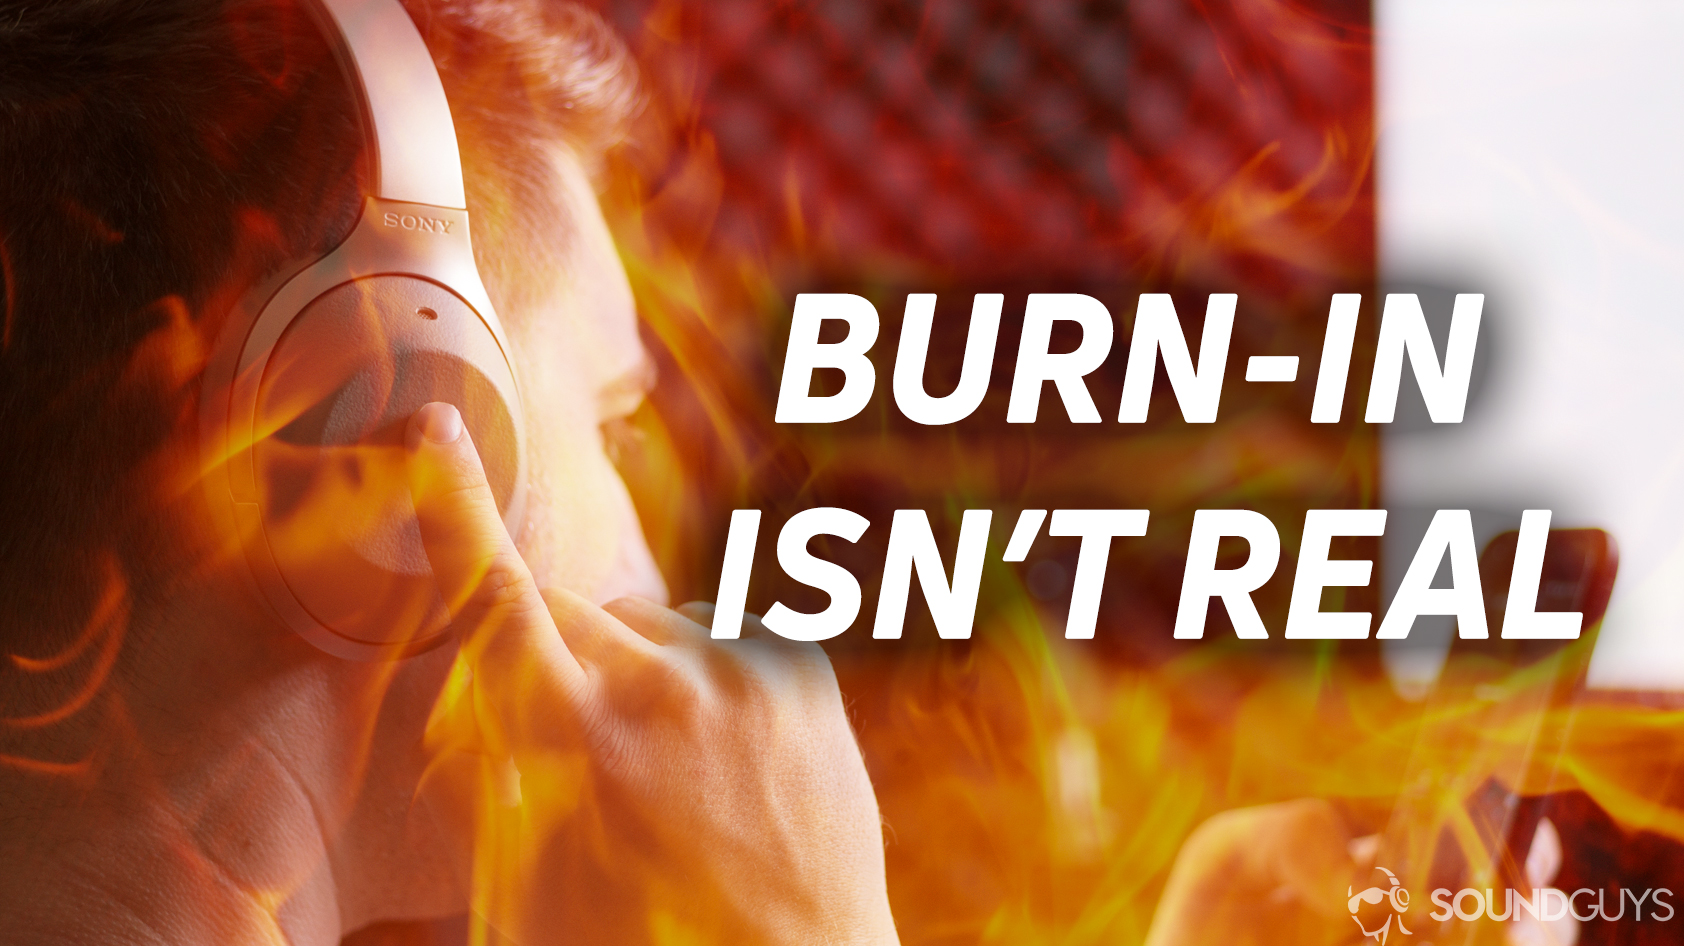 What is a Burn-in?